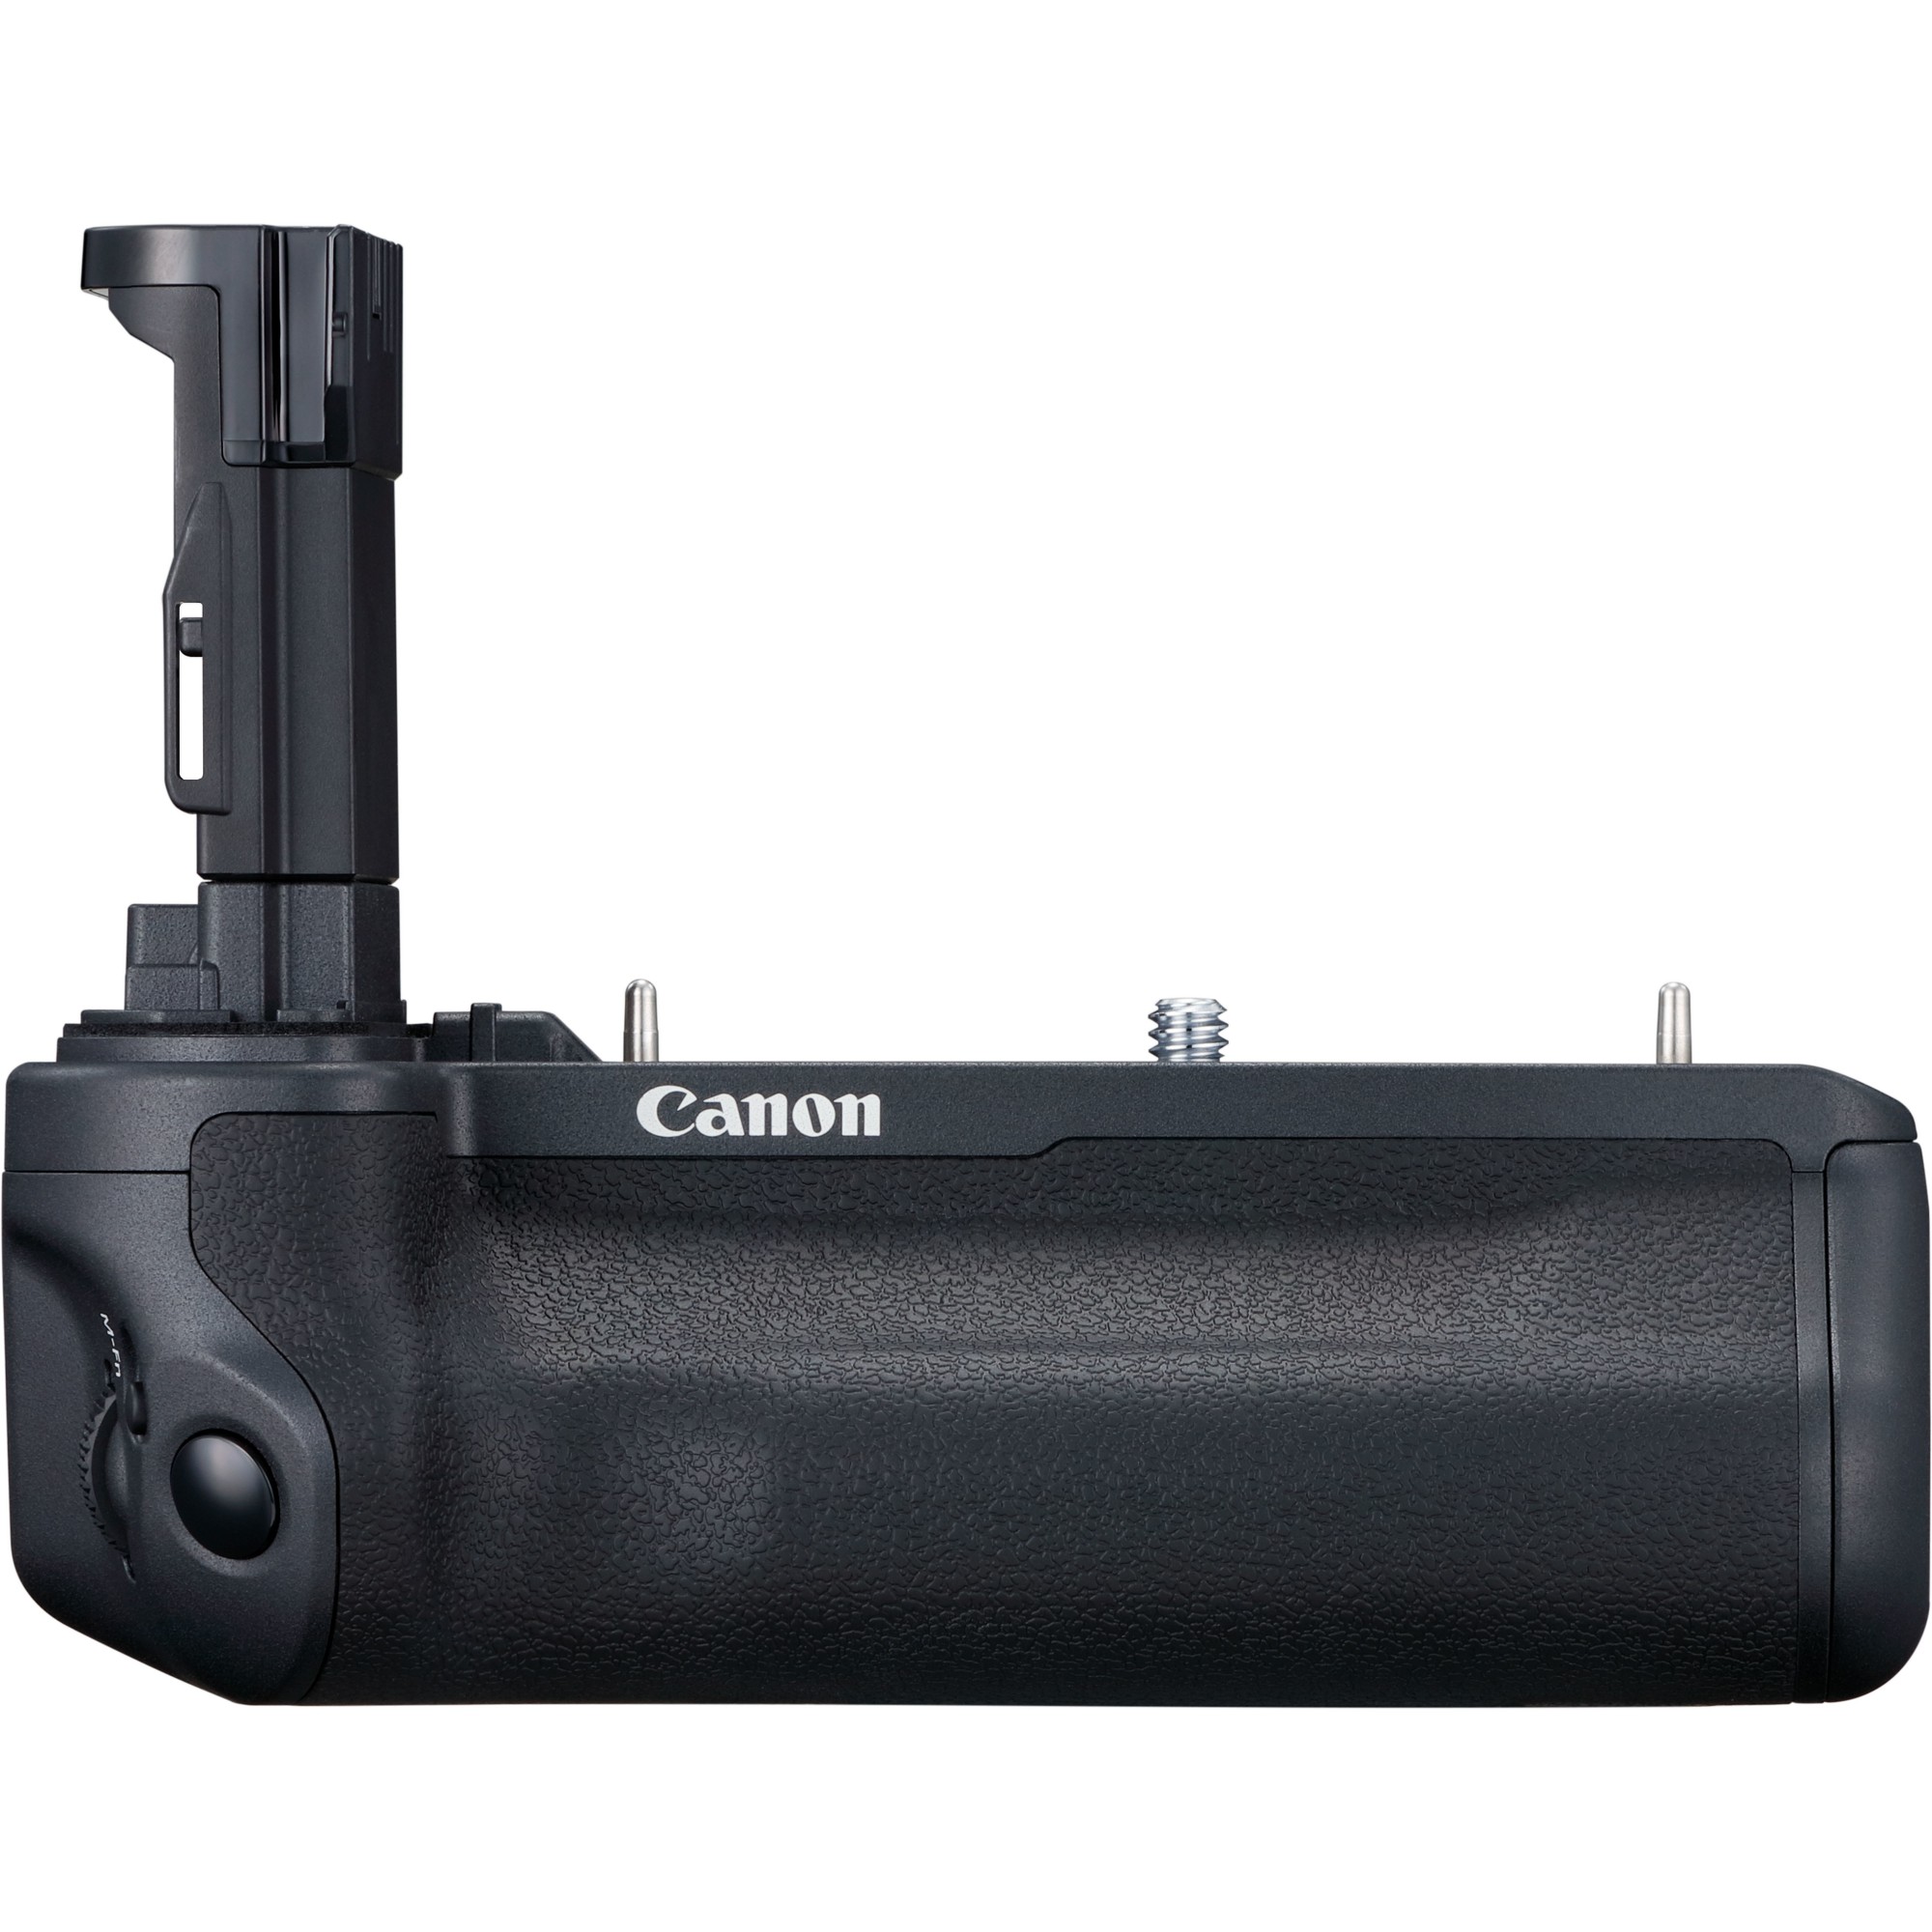 Photos - Other photo accessories Canon BG-R10 Battery Grip 4365C001 